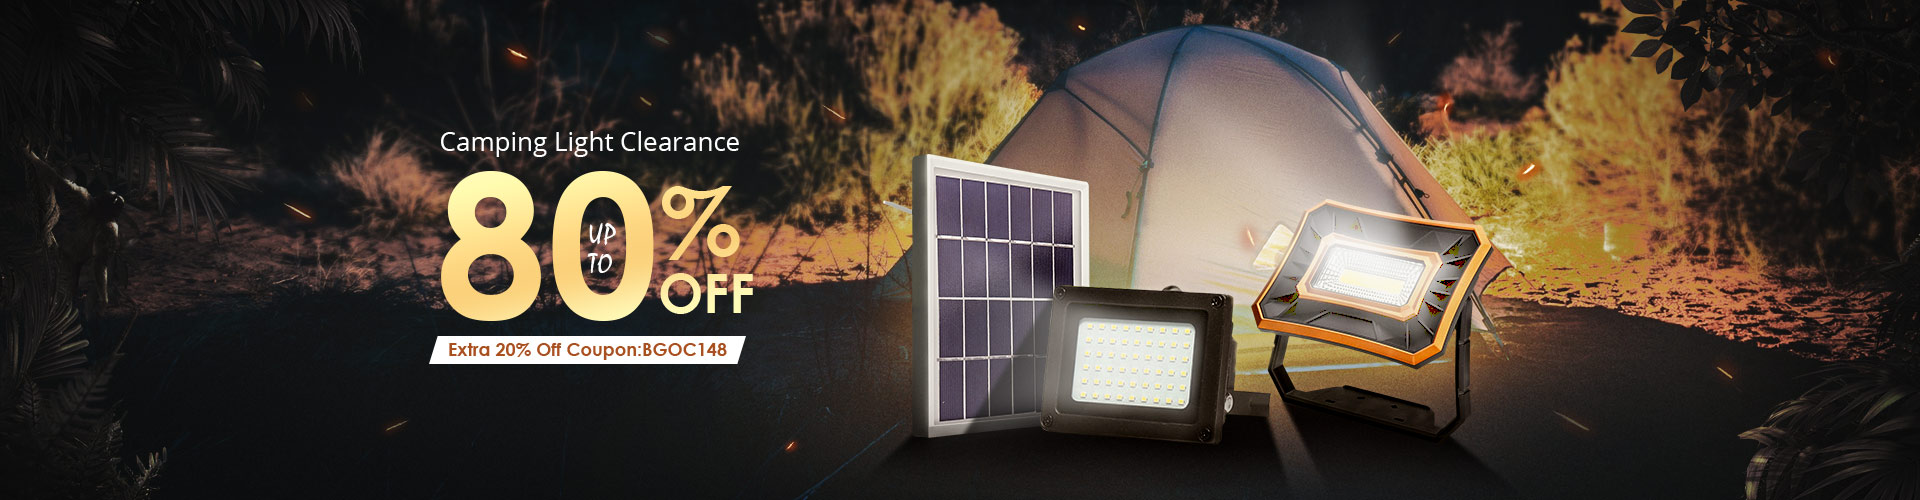 Extra 20% Off for Camping Light Clearance